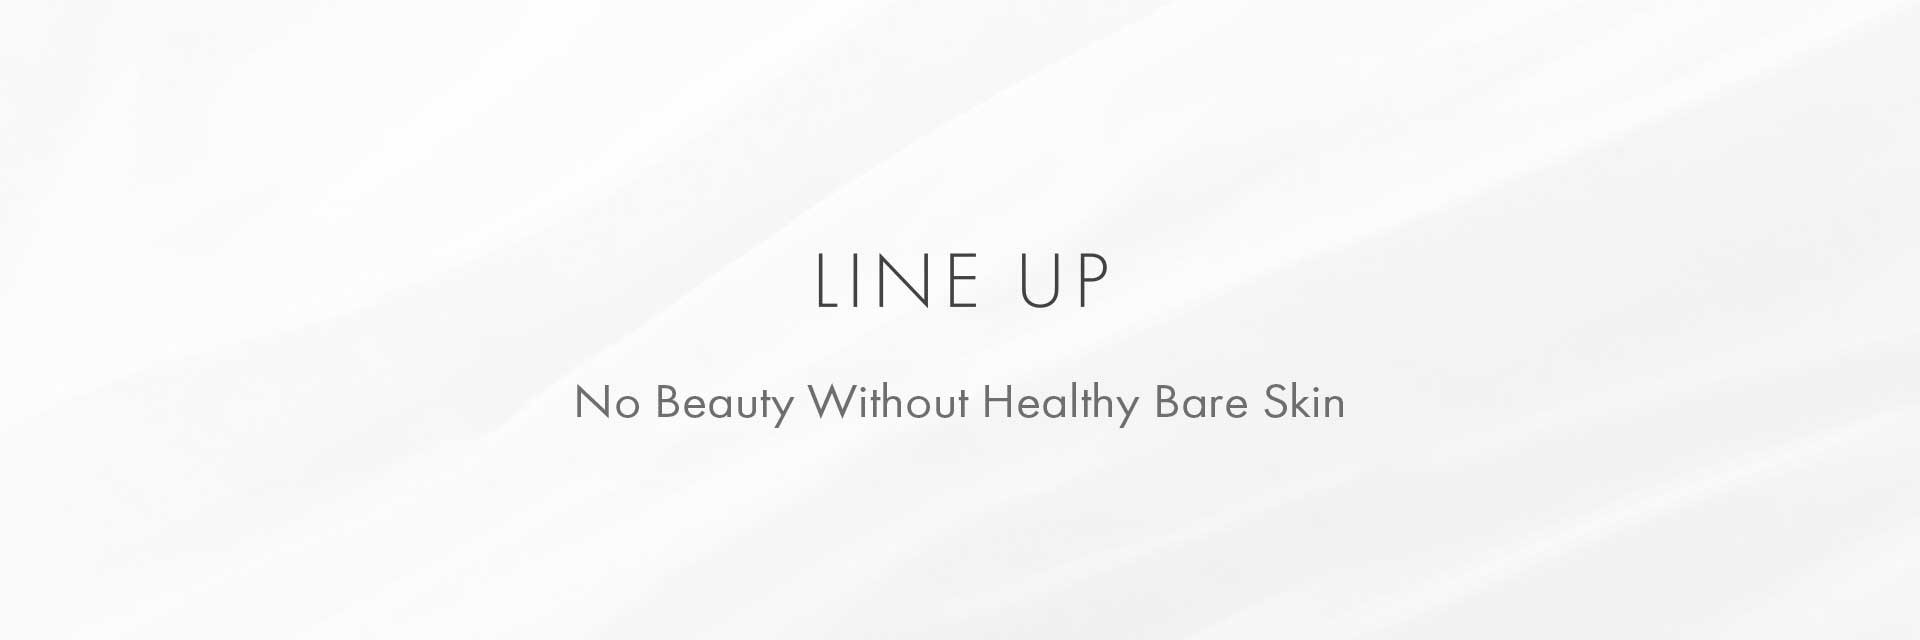 LINE UP Product list